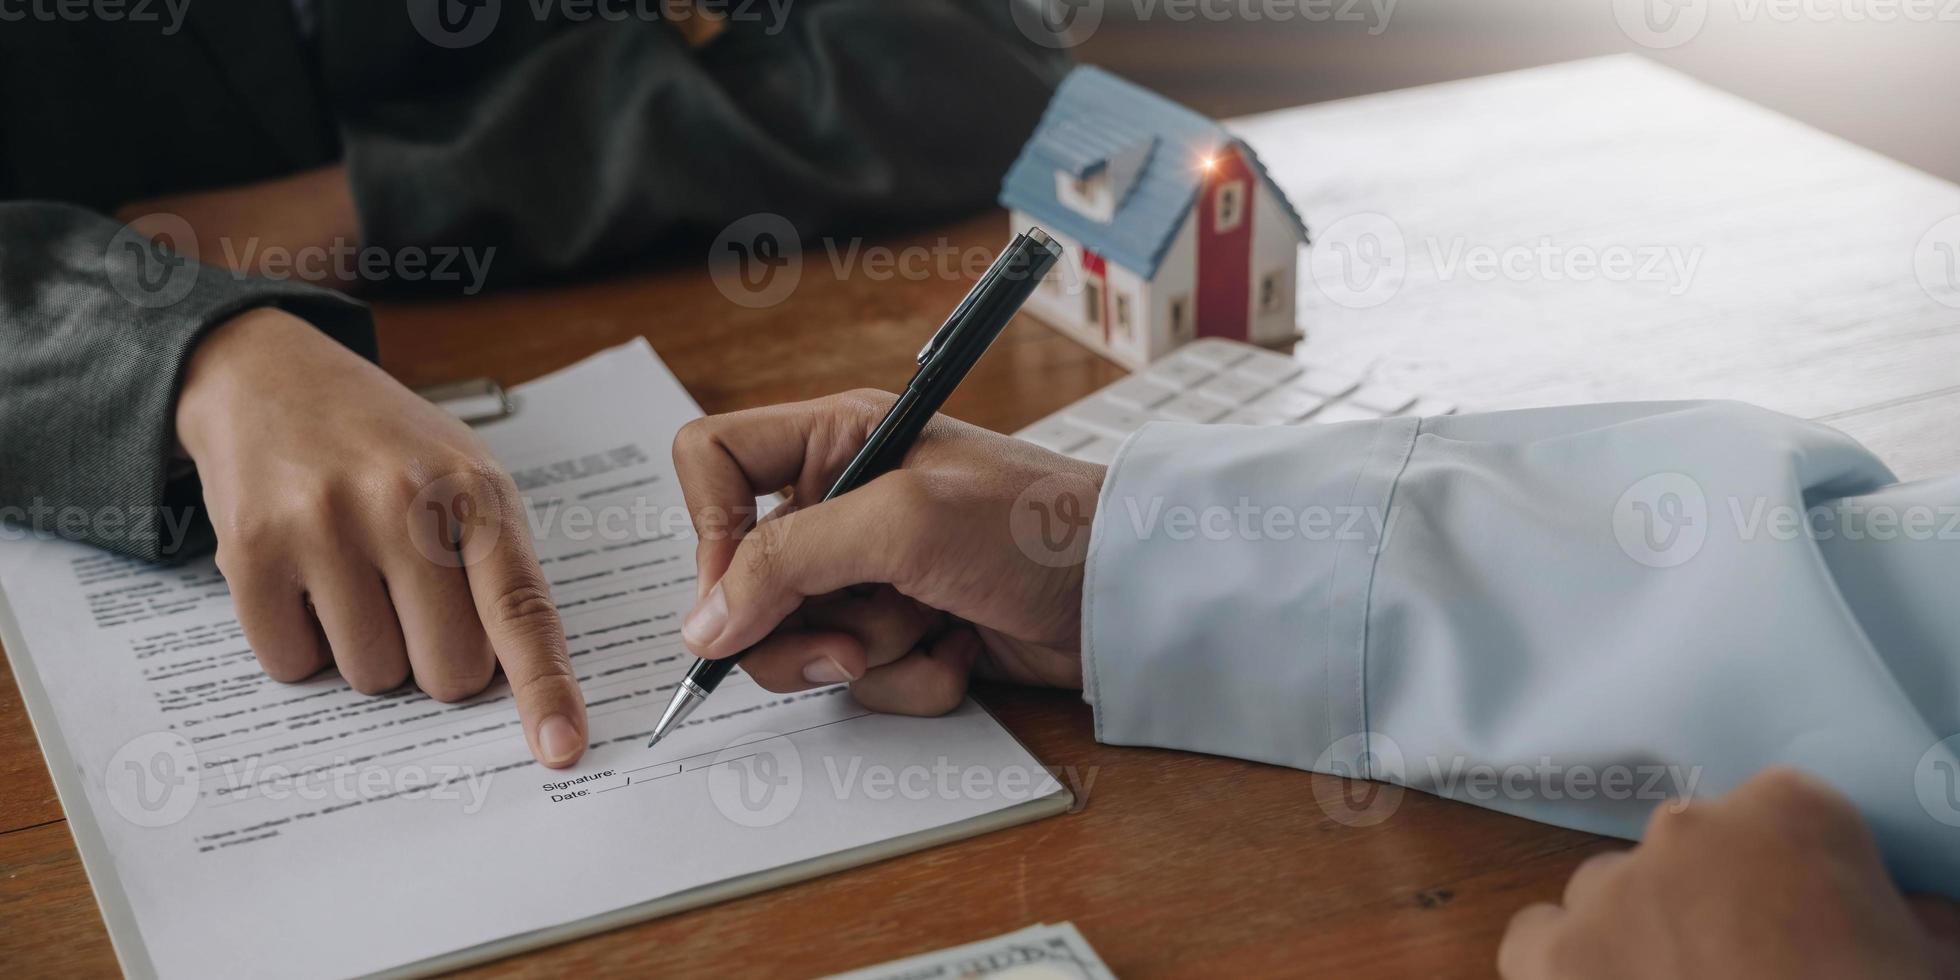 Real estate company to buy houses and land are delivering keys and houses to customers after agreeing to make a home purchase agreement and make a loan agreement. Discussion with a real estate agent photo